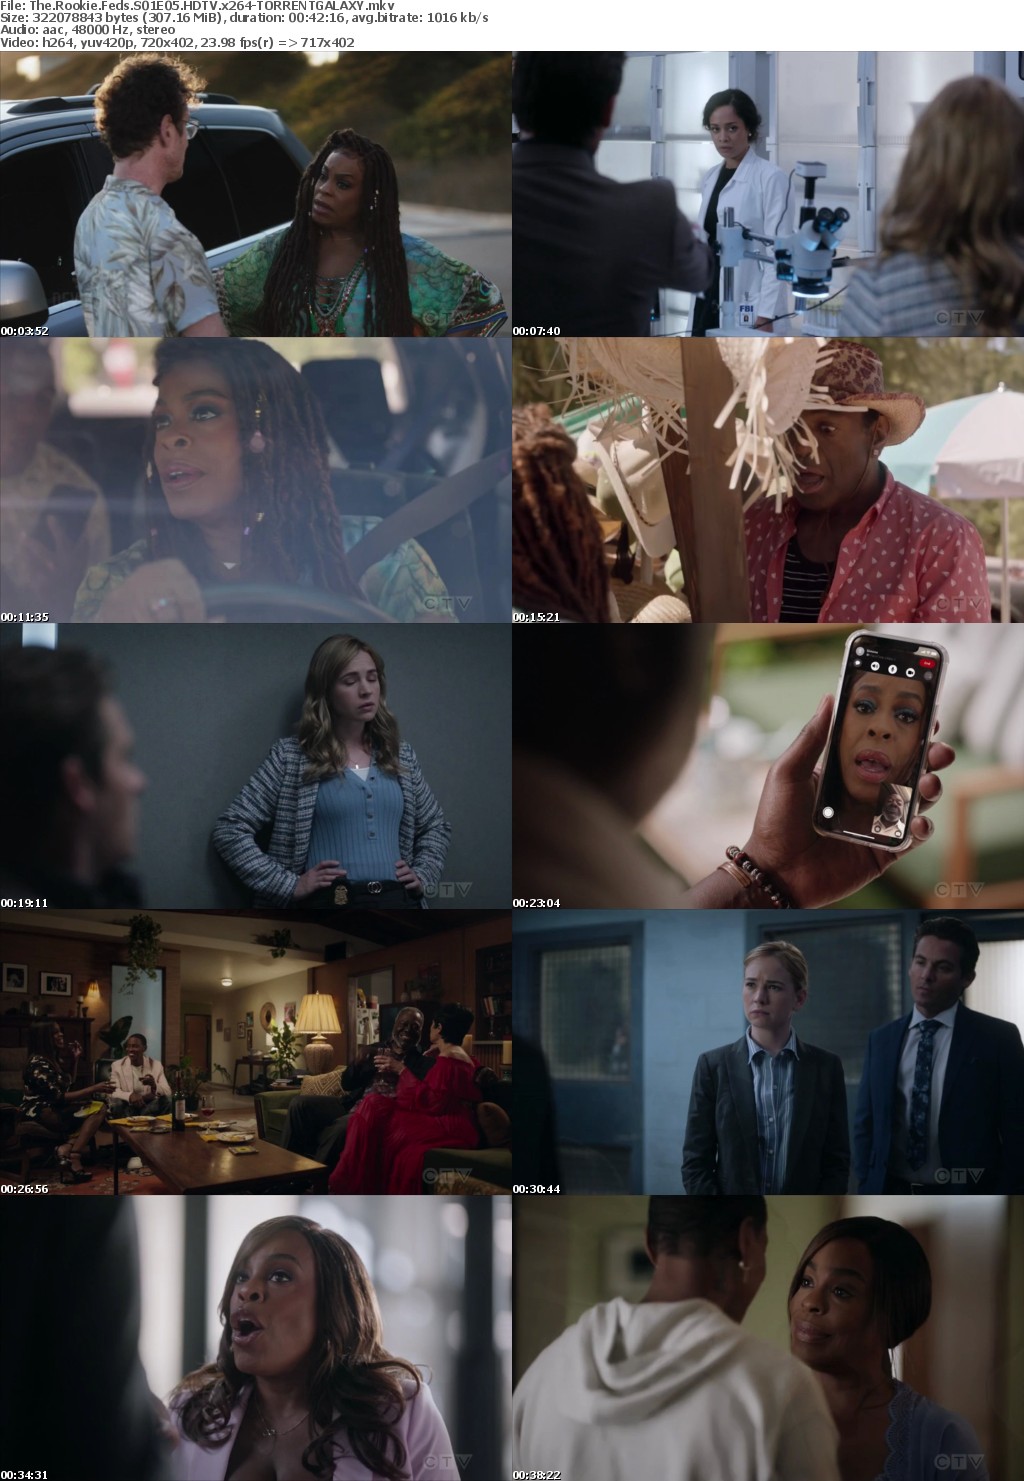 The Rookie Feds S01E05 HDTV x264-GALAXY